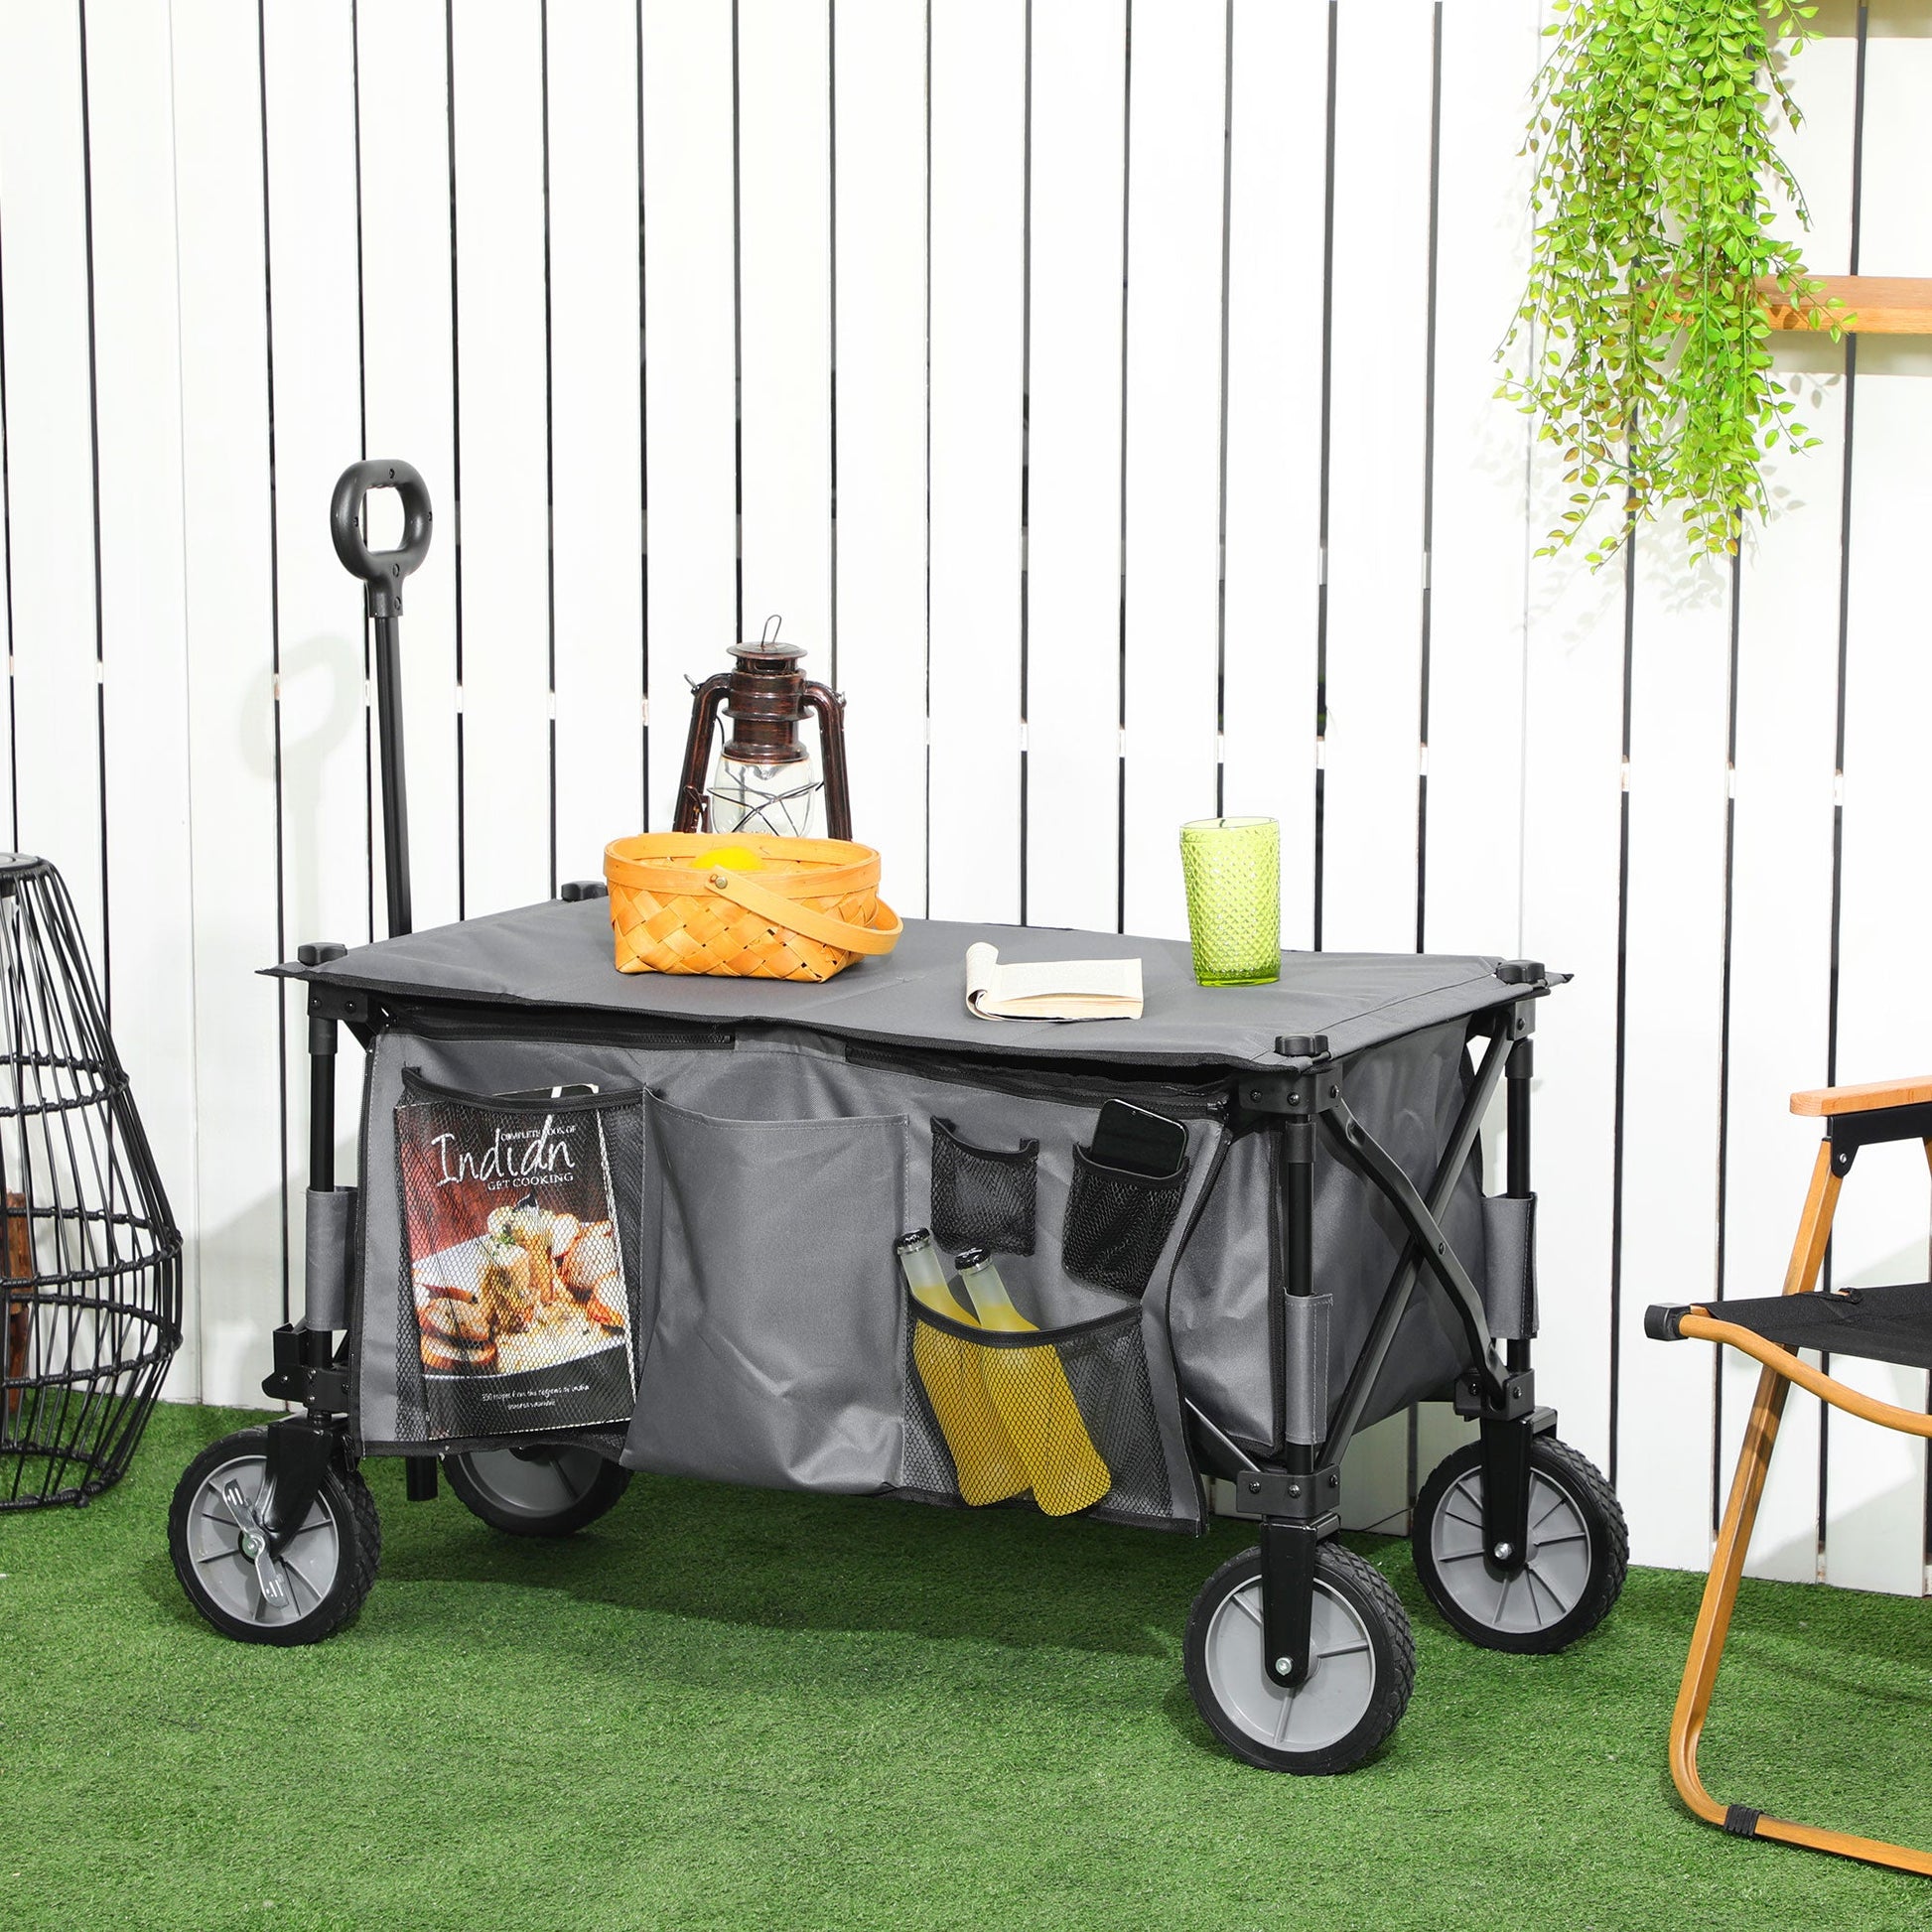 Folding Garden Wagon, Collapsible Wagon, Cart with Wheels, Steel Frame and Oxford Fabric, Dark Grey at Gallery Canada